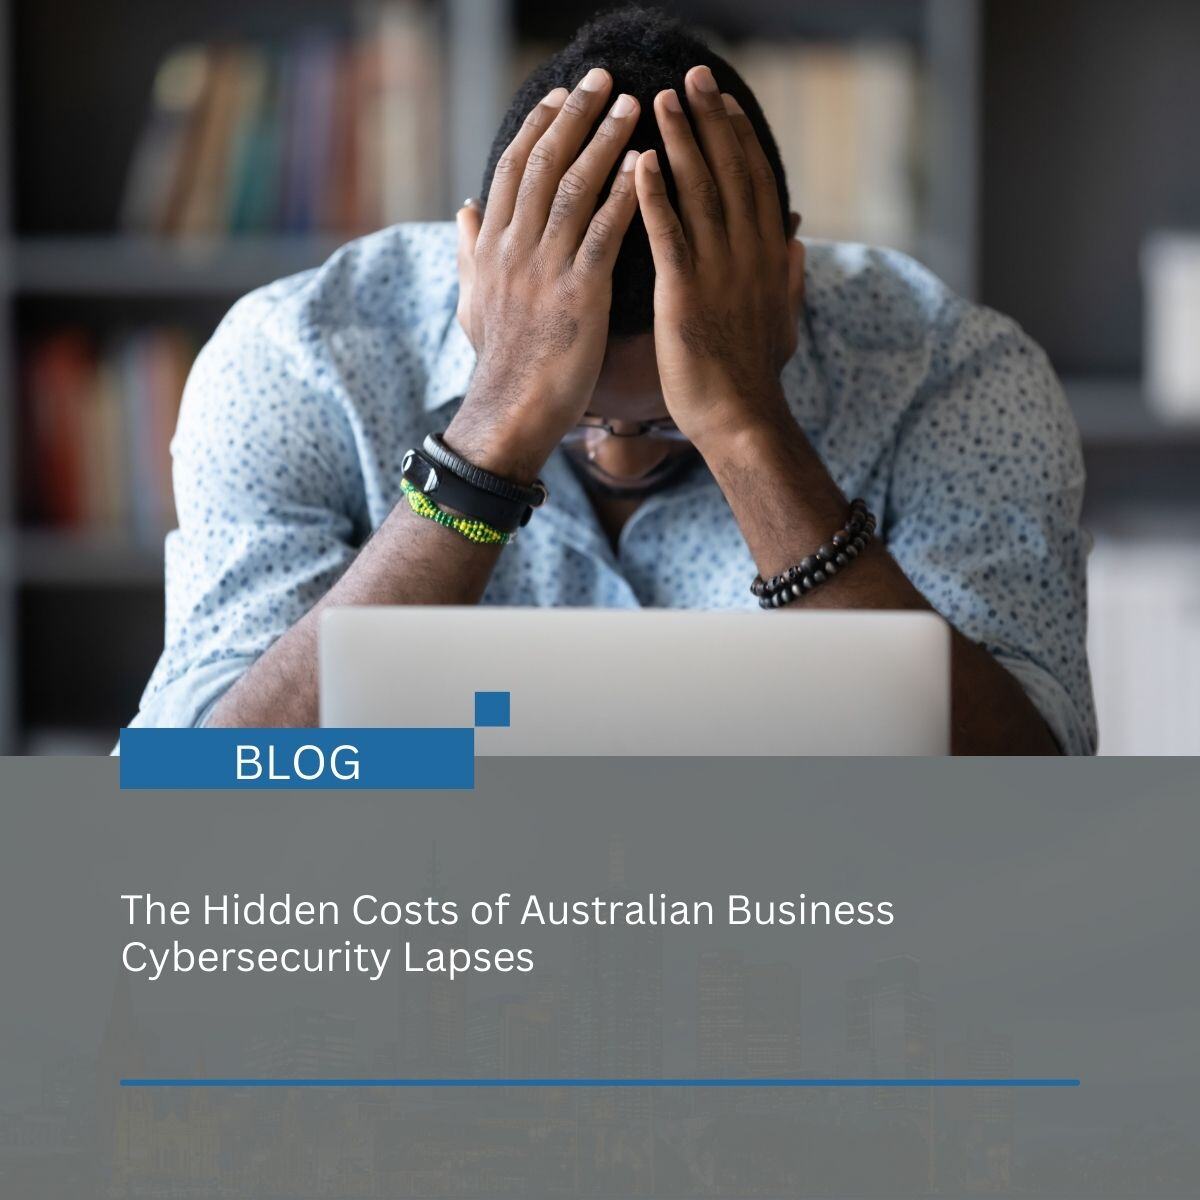 The Hidden Costs of Australian Business Cybersecurity Lapses